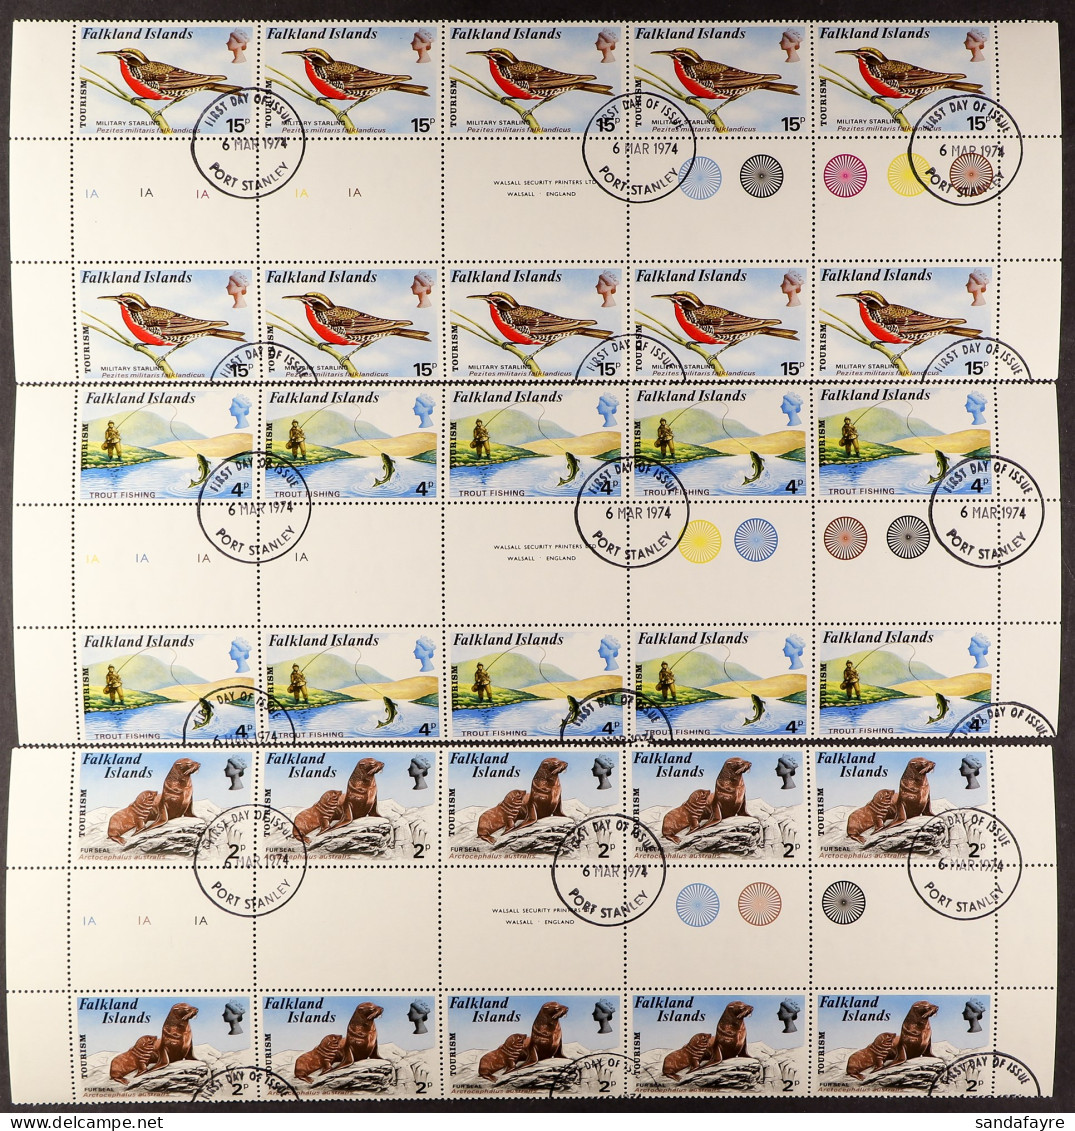 1974 Wildlife Tourism Set Complete Interpane Block 10 Creating Of 5 Gutter Pairs, Cancelled By Port Stanley Cds's. Heijt - Falkland Islands